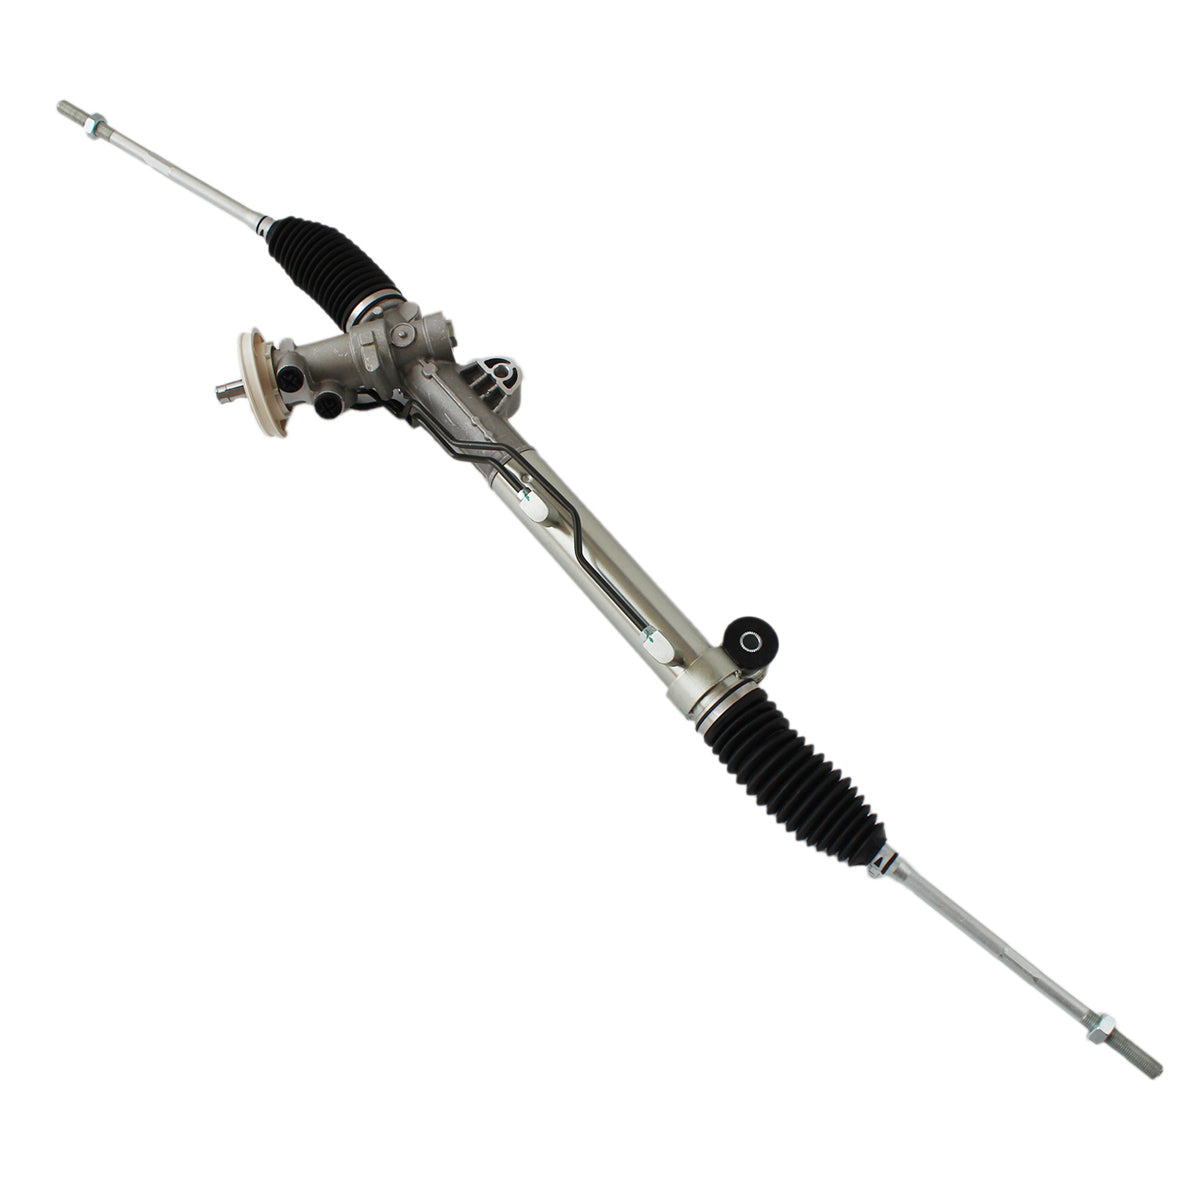 Daysyore® Power Steering Rack and Pinion for Chevy Impala Monte Carlo Buick Regal 22-186 26079913 26021769